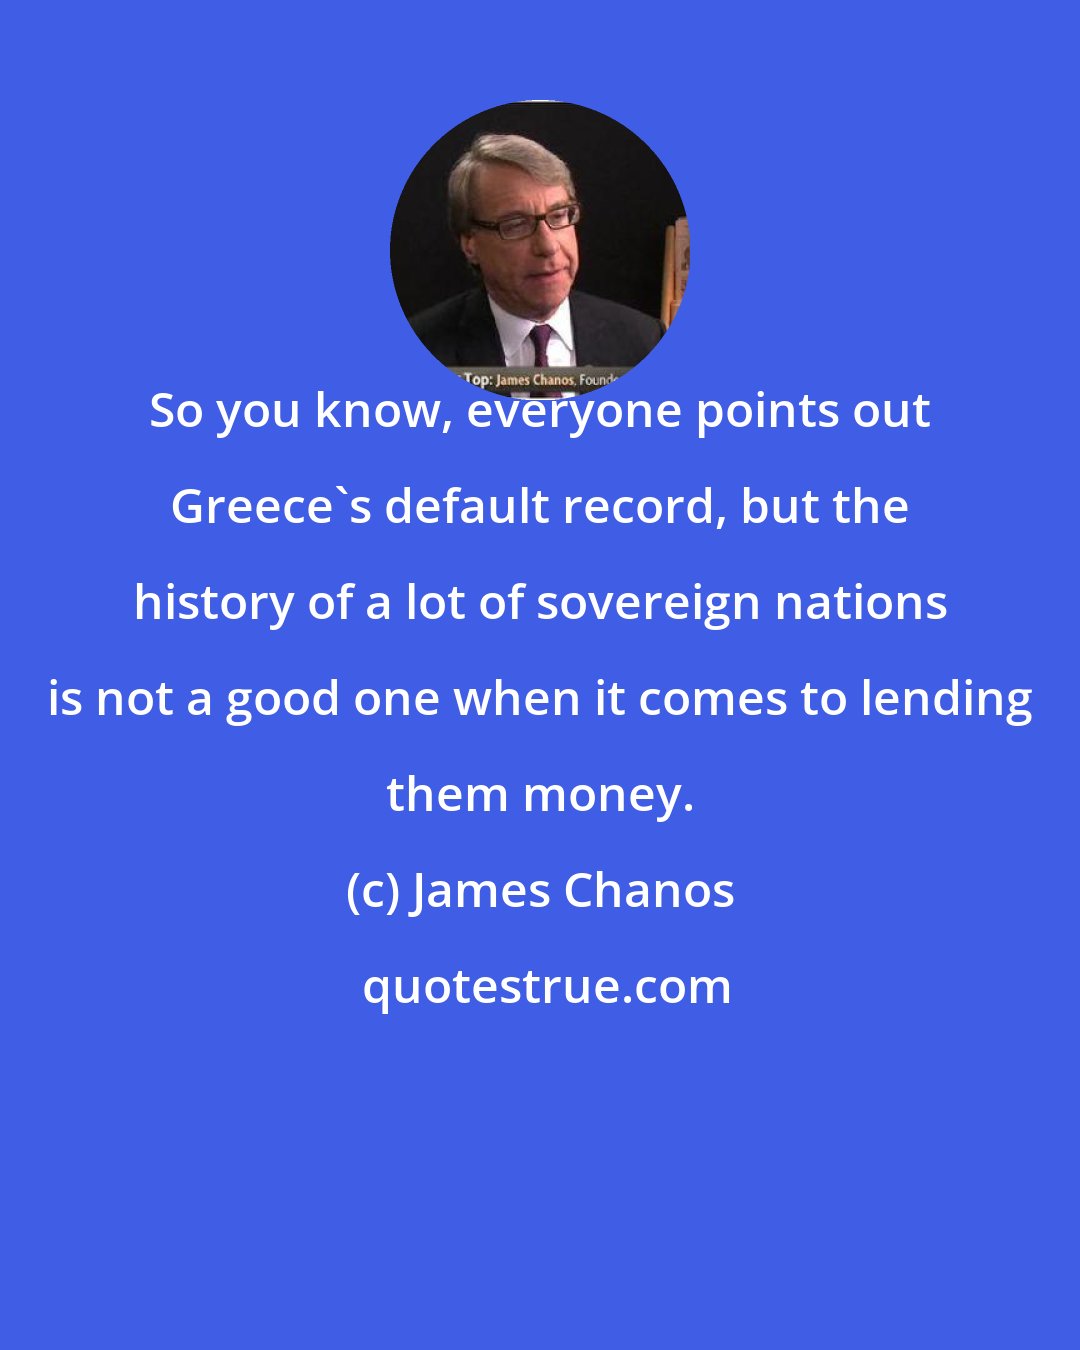 James Chanos: So you know, everyone points out Greece's default record, but the history of a lot of sovereign nations is not a good one when it comes to lending them money.